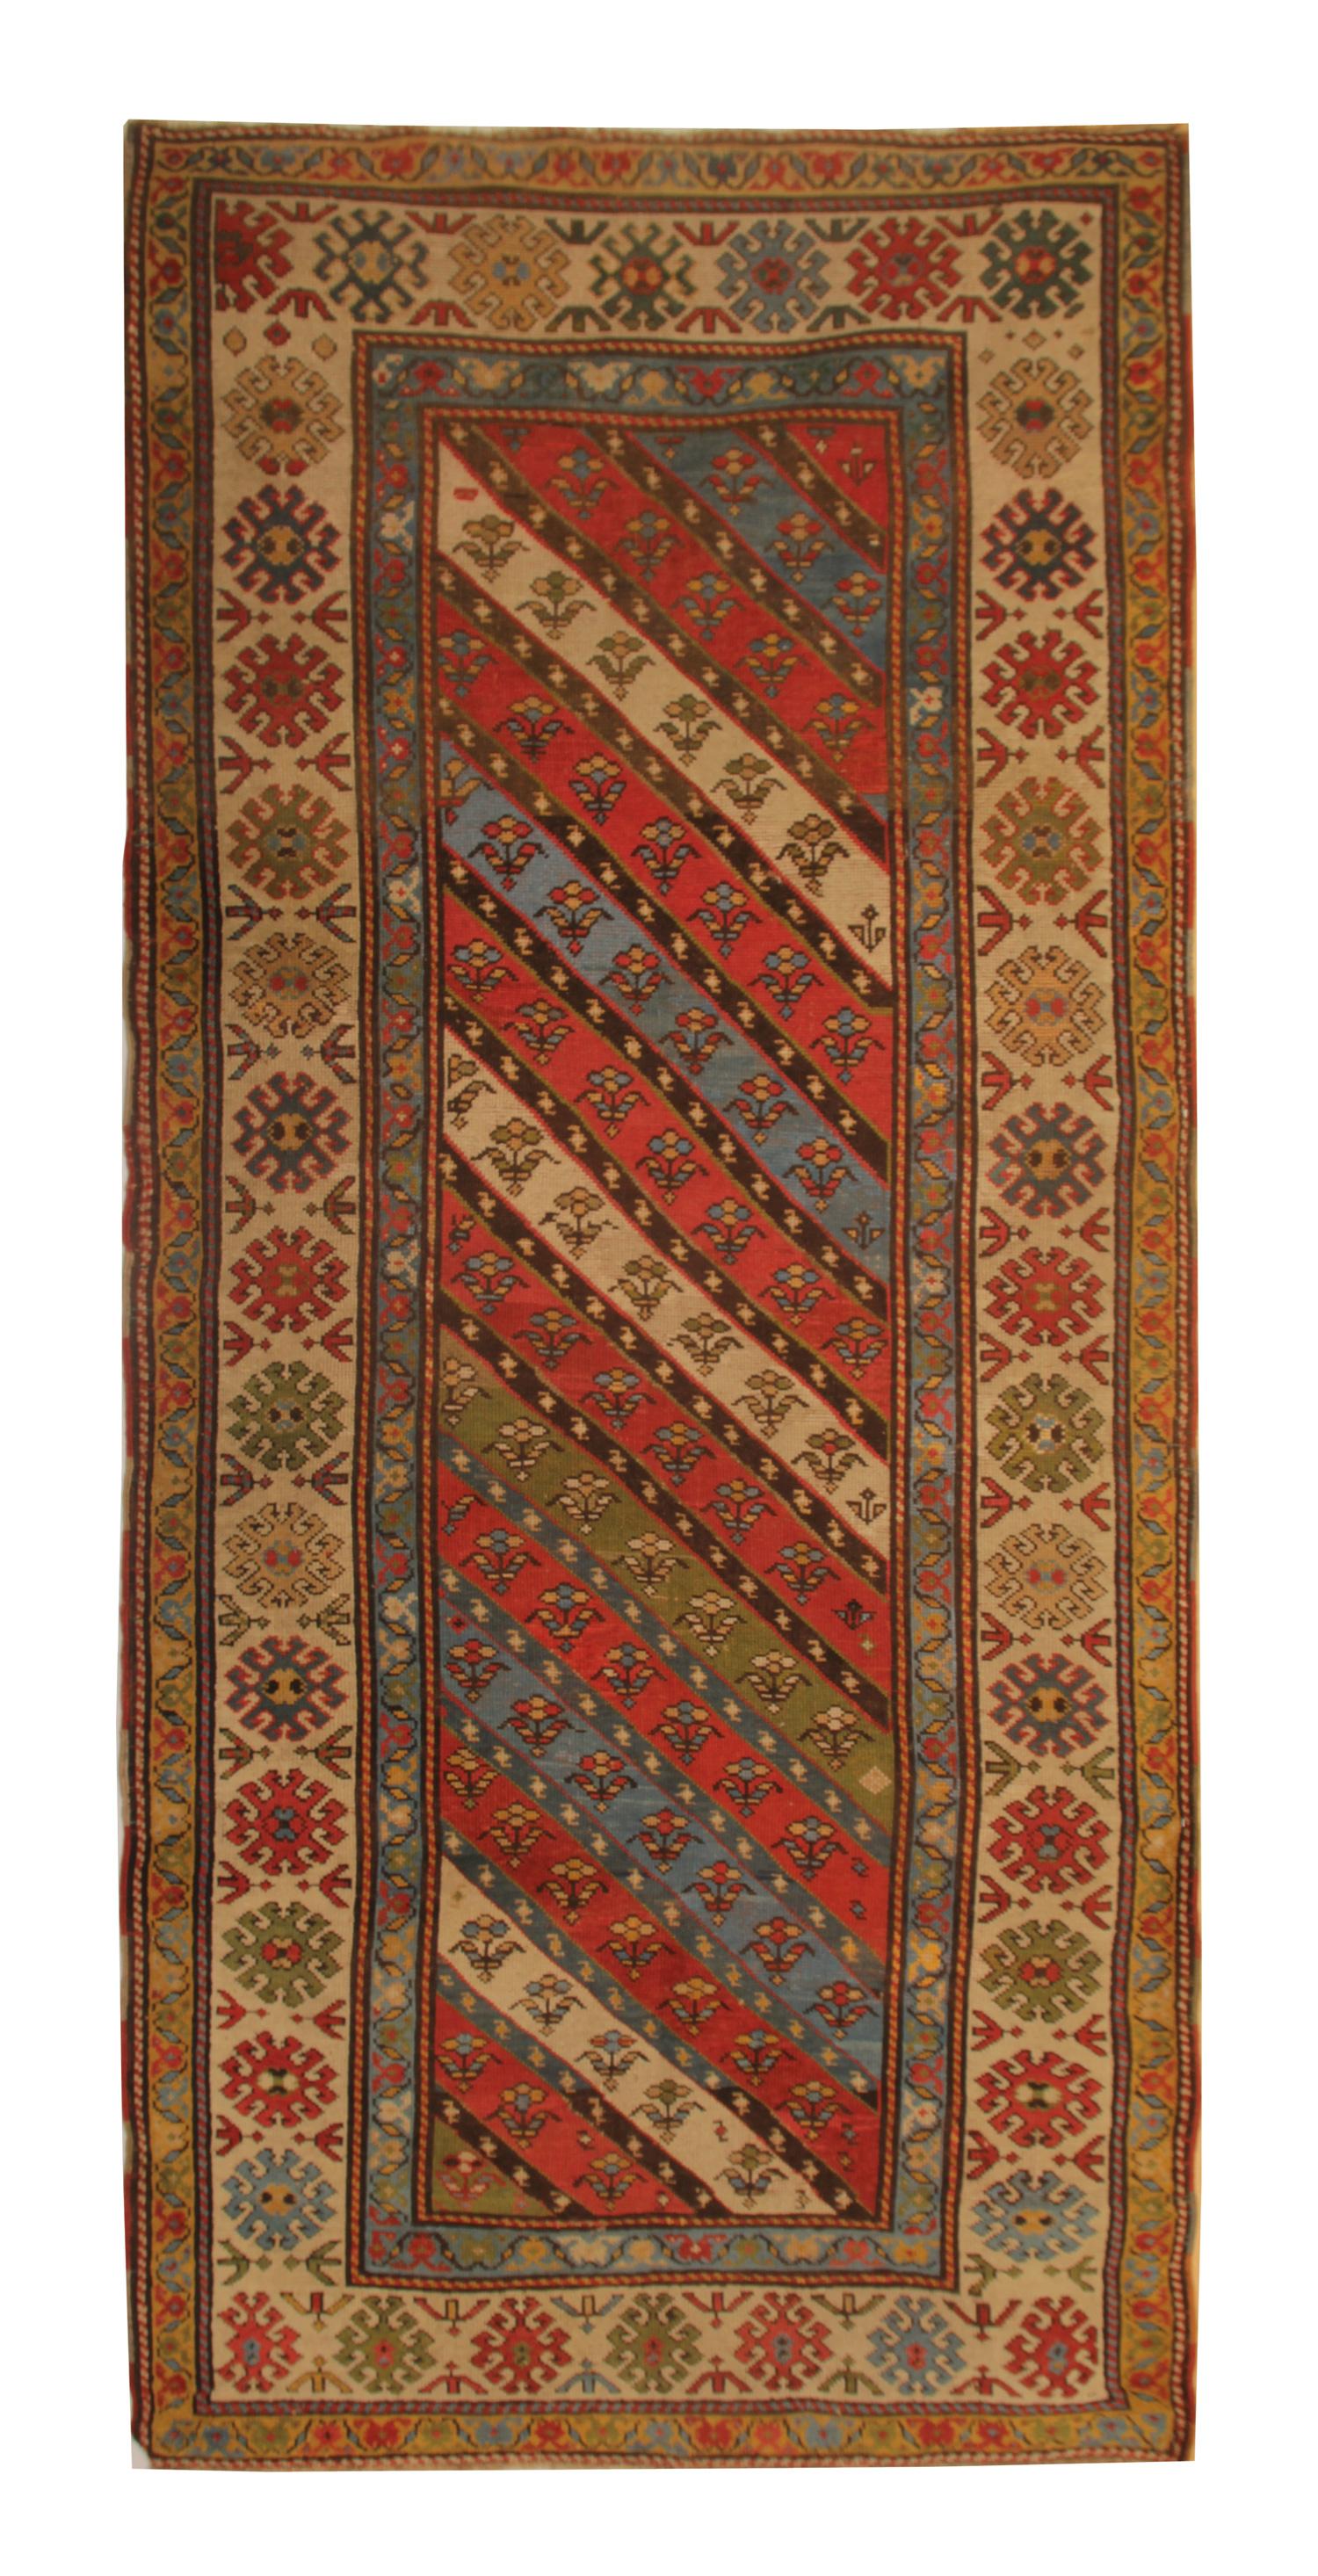 An excellent example of traditional Caucasian handmade carpet rug runner weaving from the Shirvan region. These Stripped ground design patterned rugs can be the best element of home decor objects to give warmth to the environment because this woven